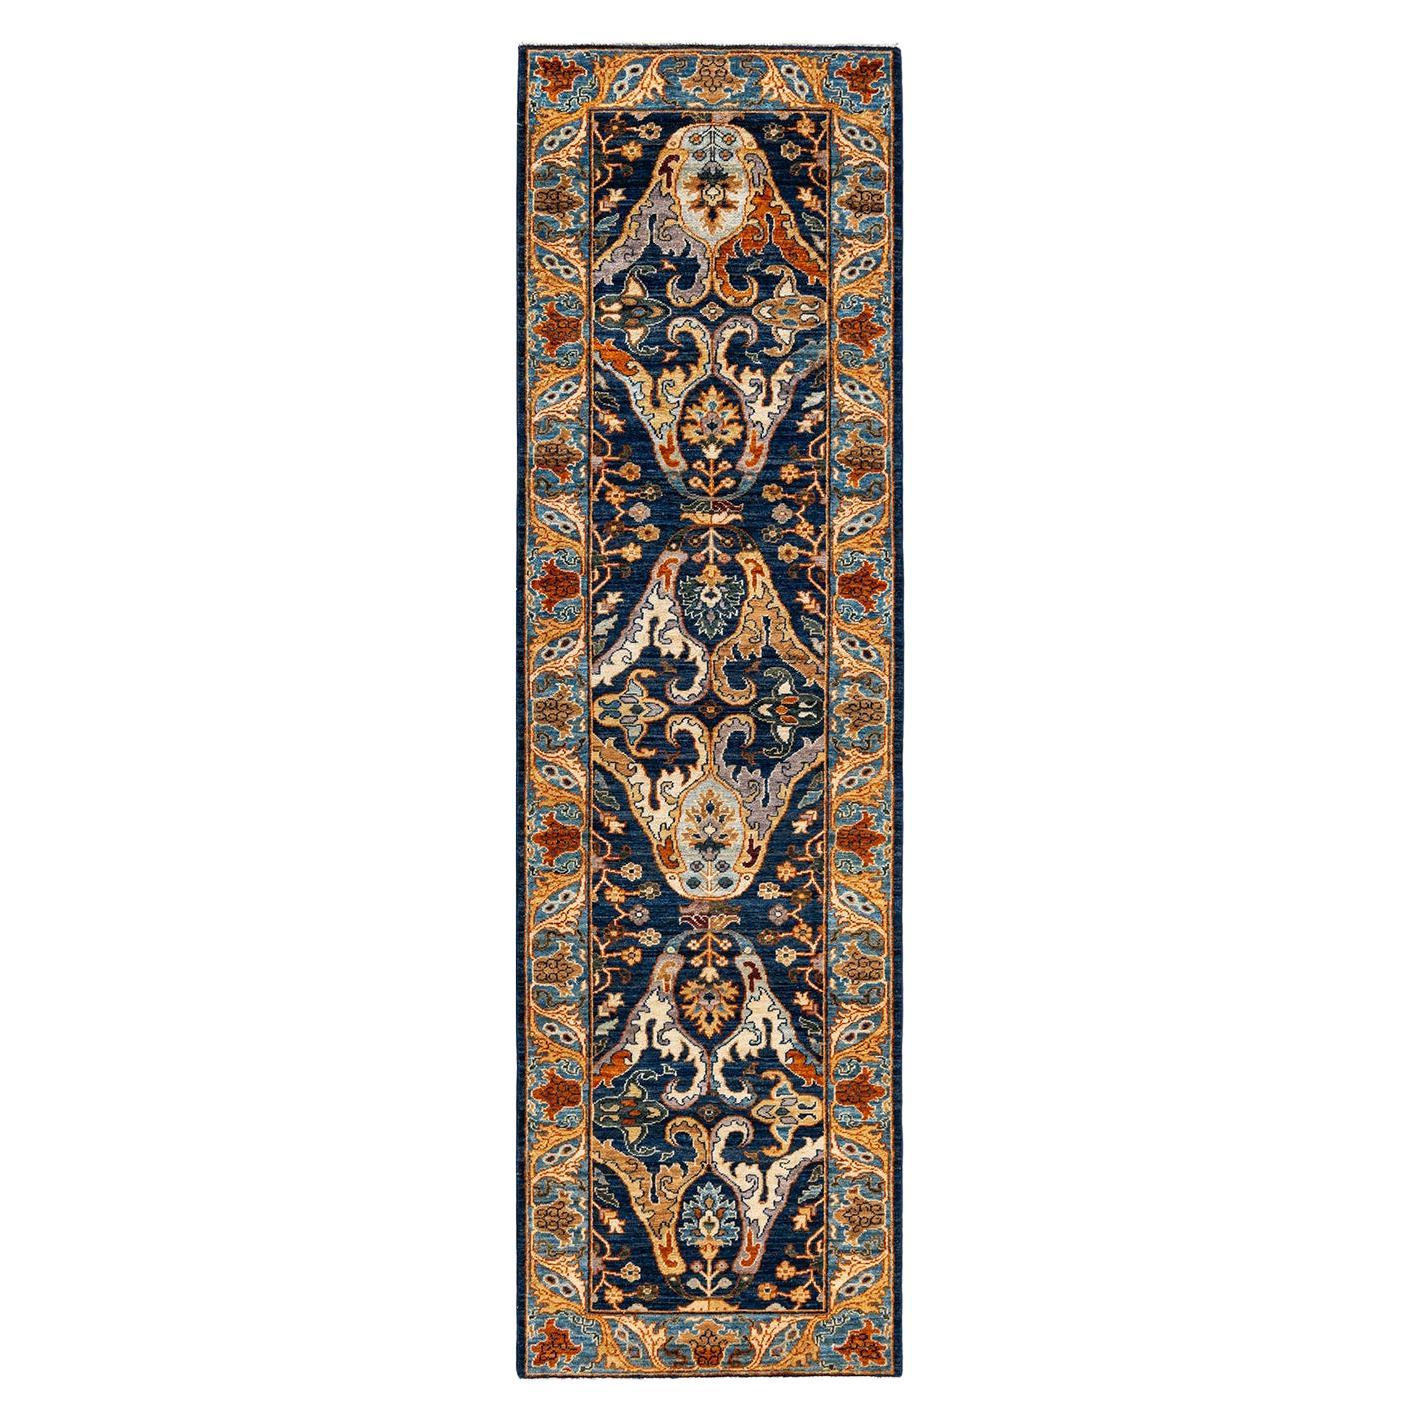 Serapi, One-of-a-kind Hand-Knotted Runner Rug, Blue